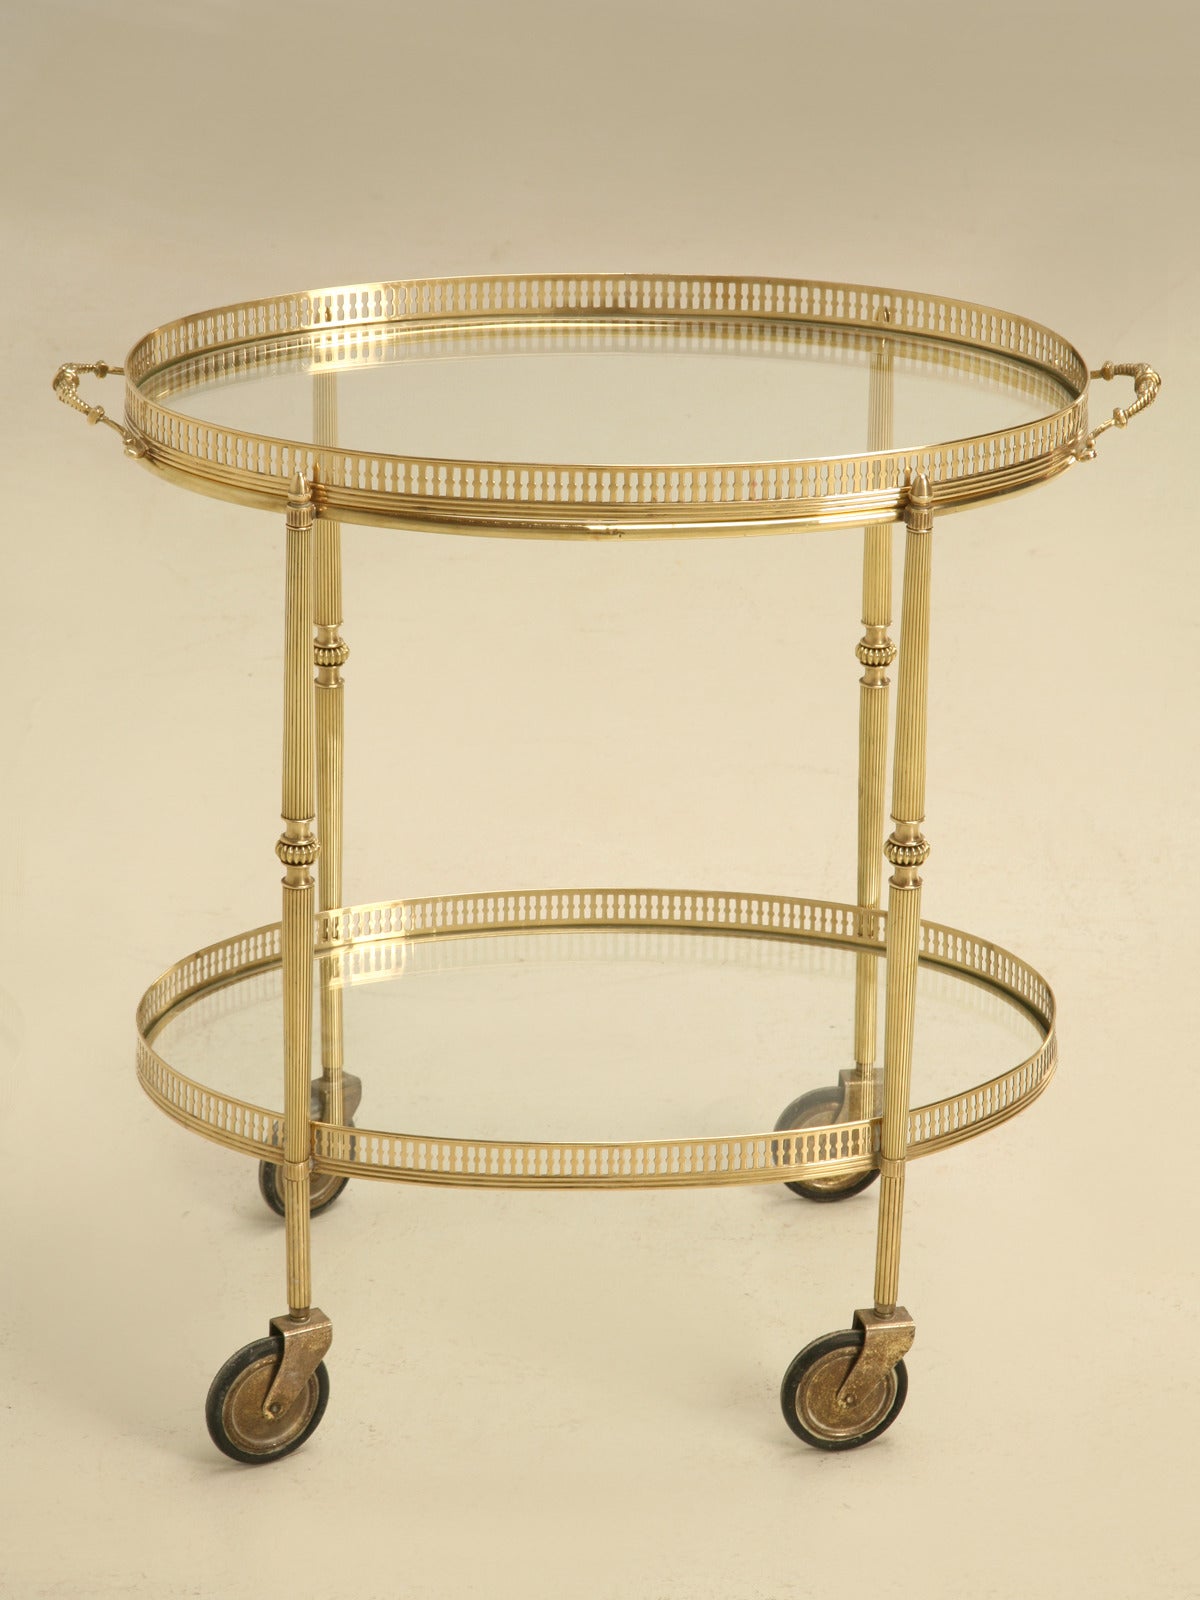 Beautiful vintage French oval shape brass tea, or bar cart with removable tray. We hand polished the brass and replaced both pieces of glass. We stock several brass carts on a regular basis, but the oval shape is hard to find, let alone in such nice